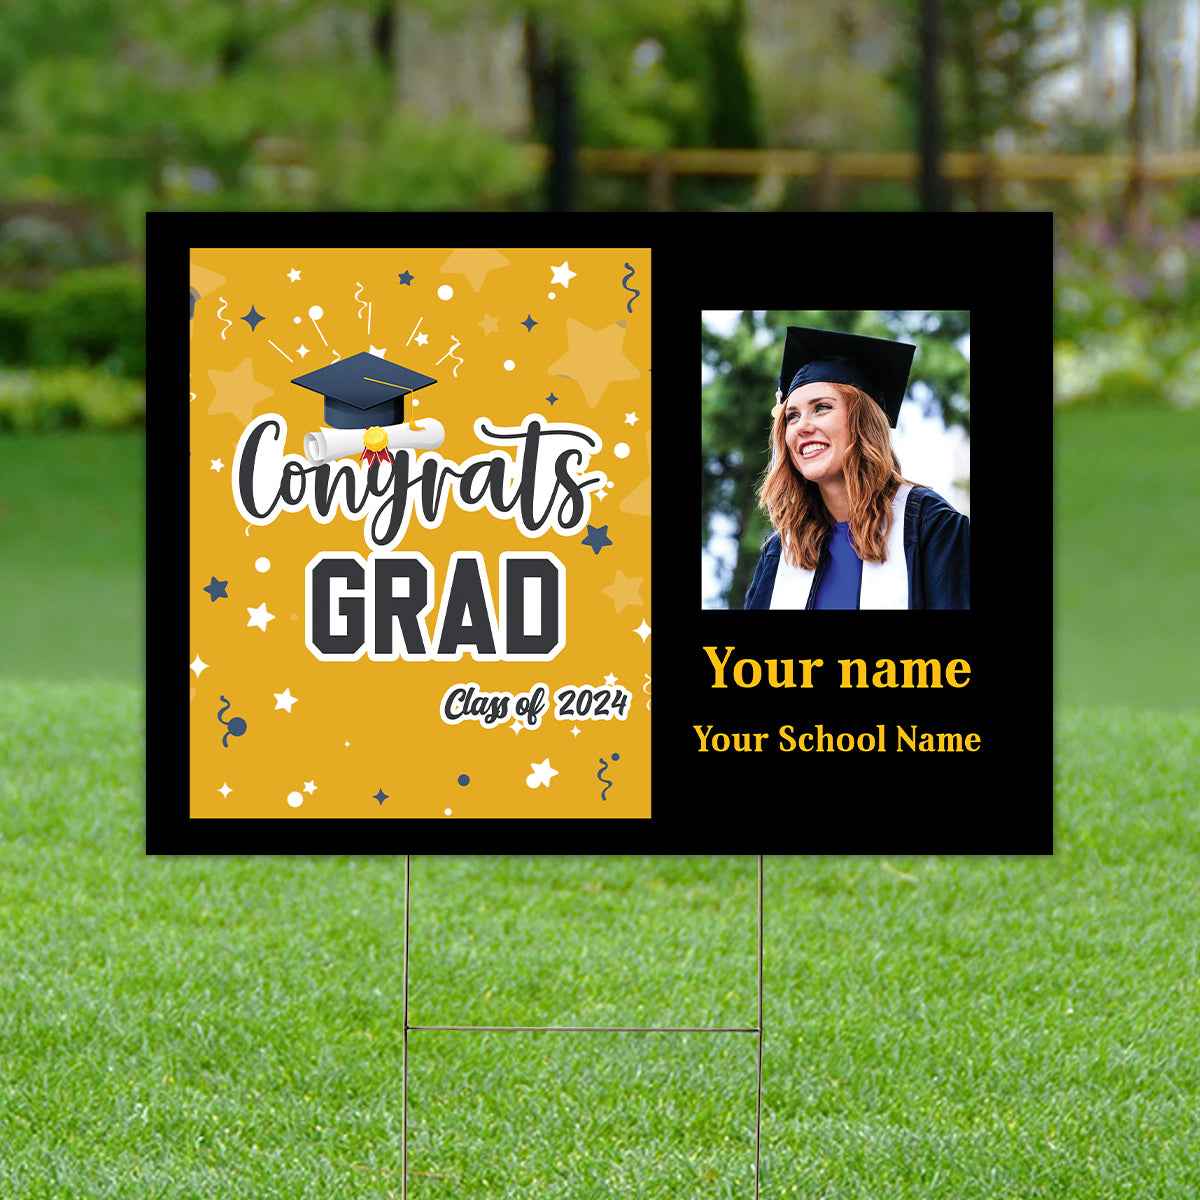 Congrats Grad, Custom Photo And Texts - Personalized Lawn Sign, Yard Sign, Graduation Gift, College Graduation